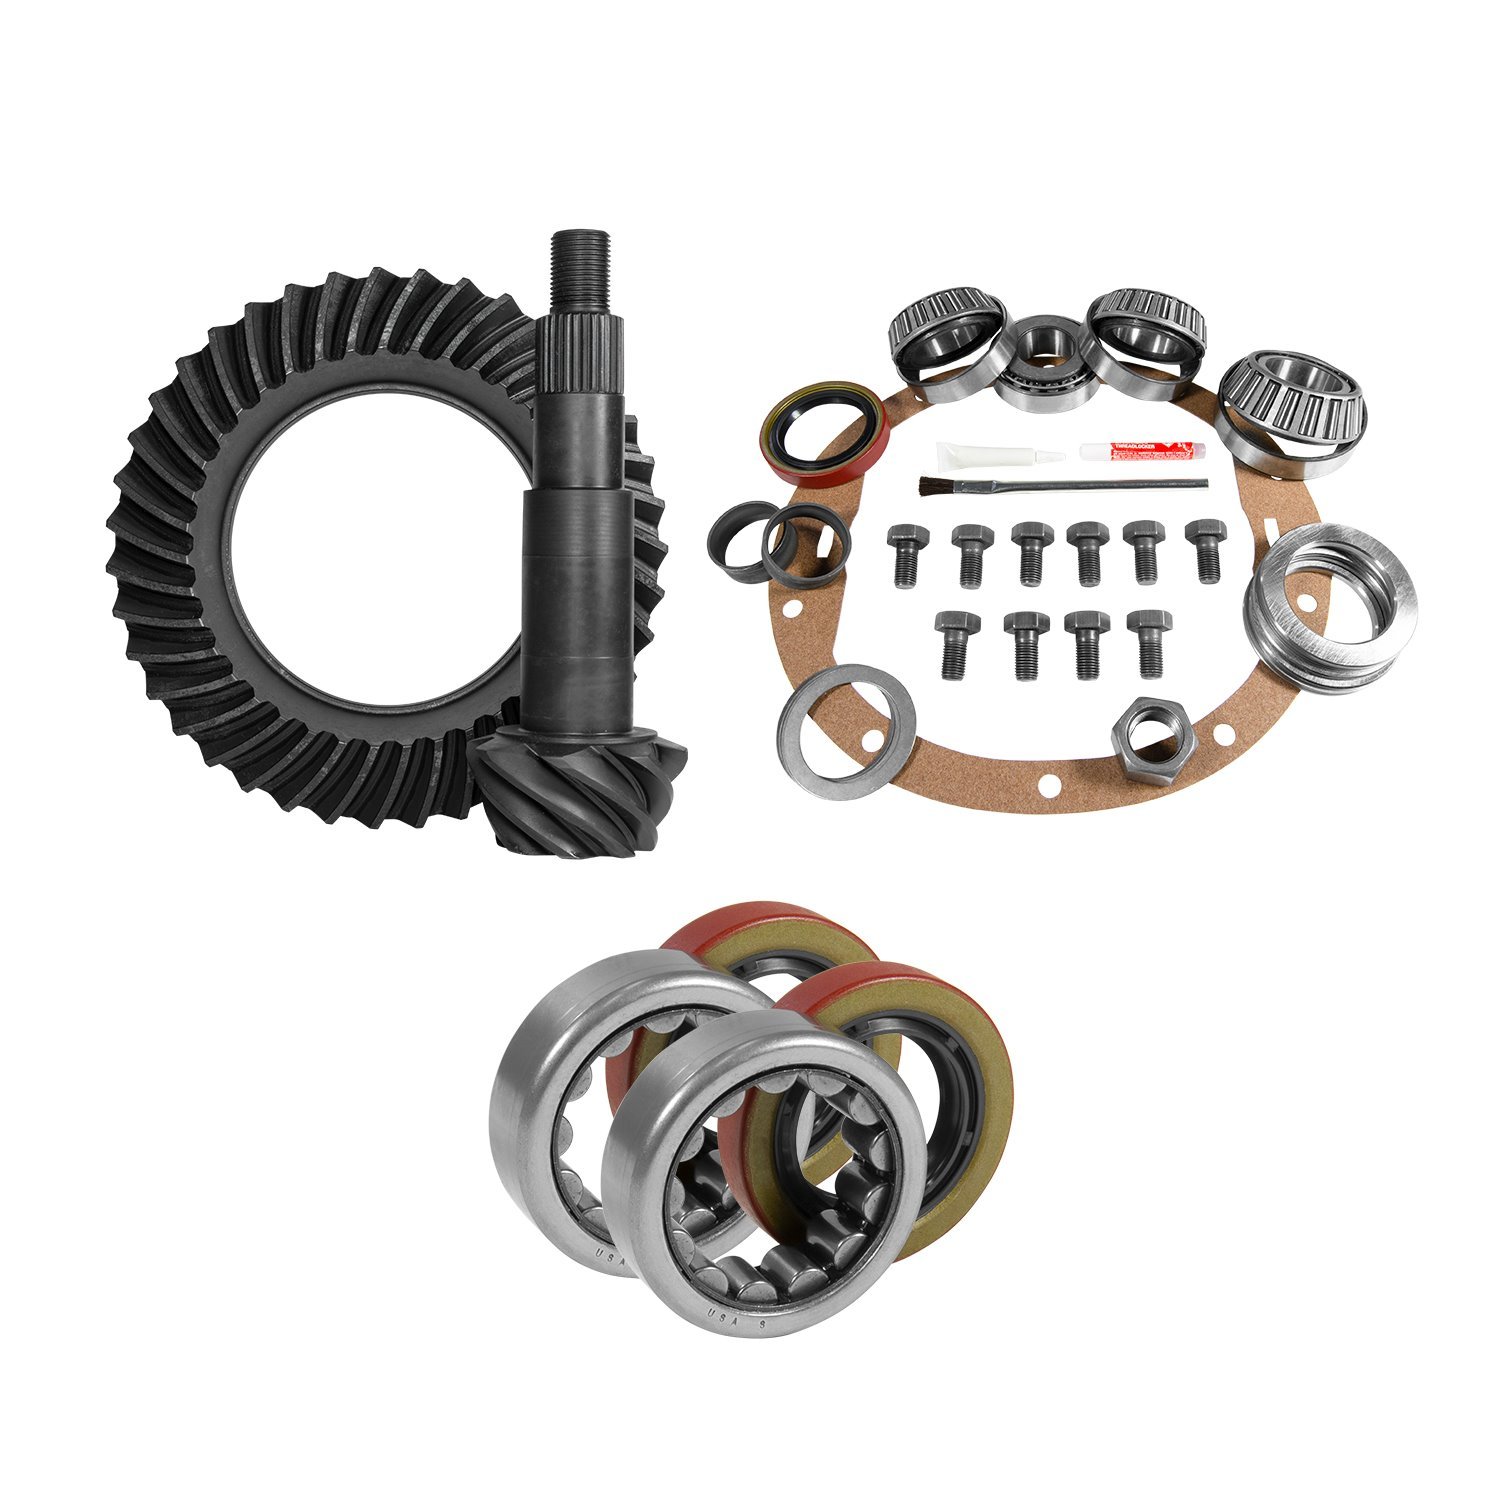 Muscle Car Re-Gear Kit For GM 8.5 in. Diff, 30 Spline, 4.56 Ratio